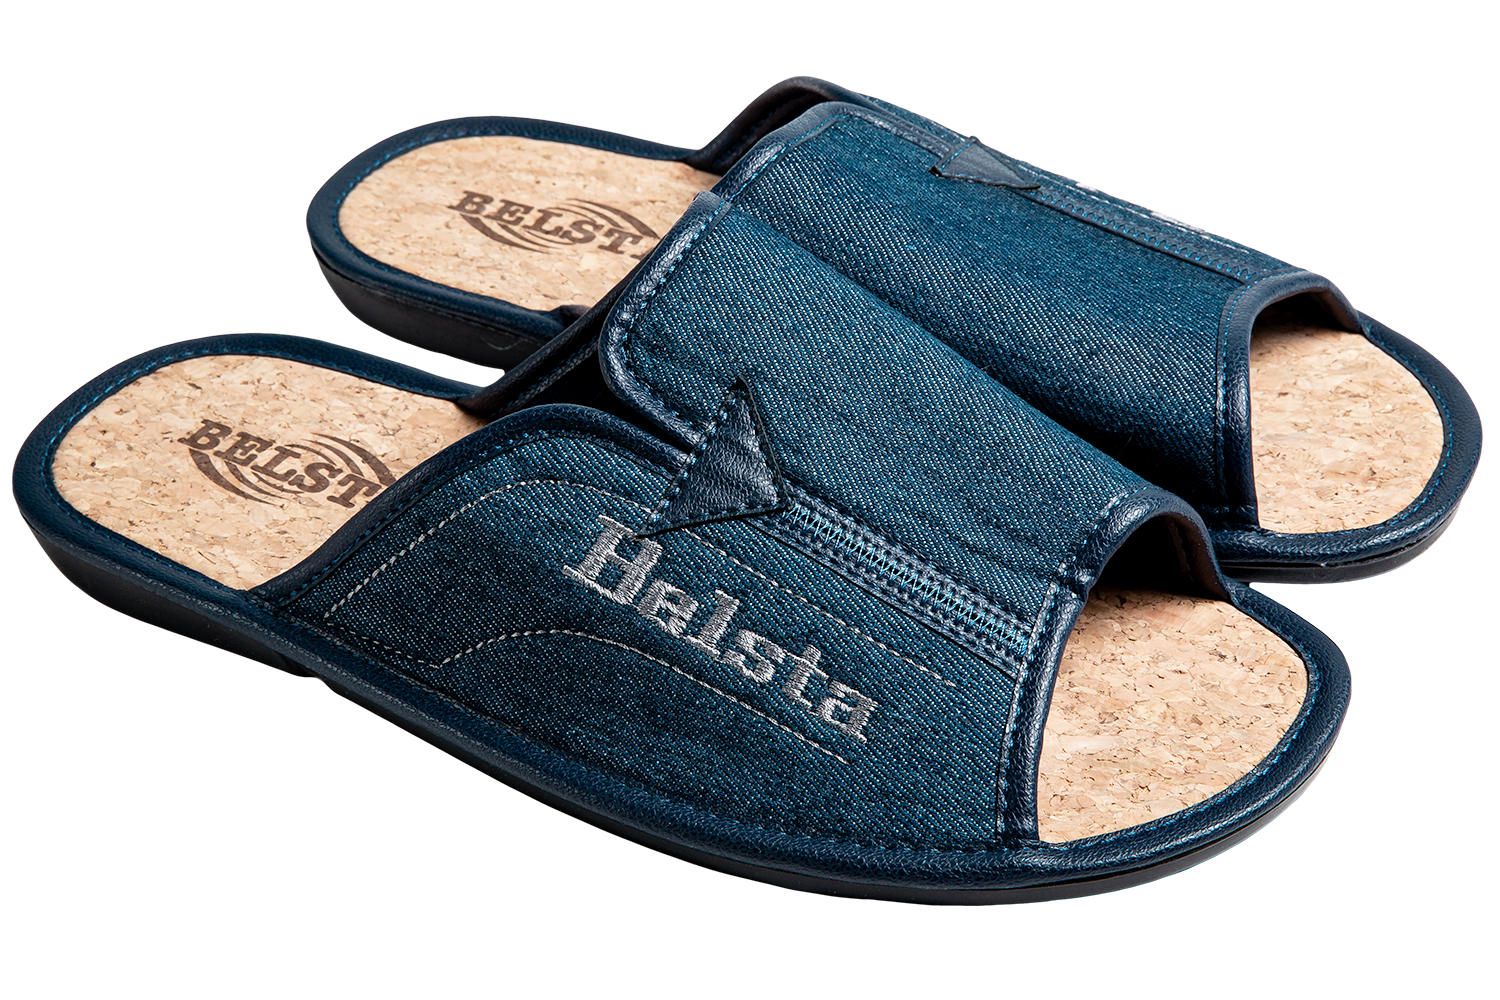 Men's open slippers BELSTA in denim and eco leather inserts - 1